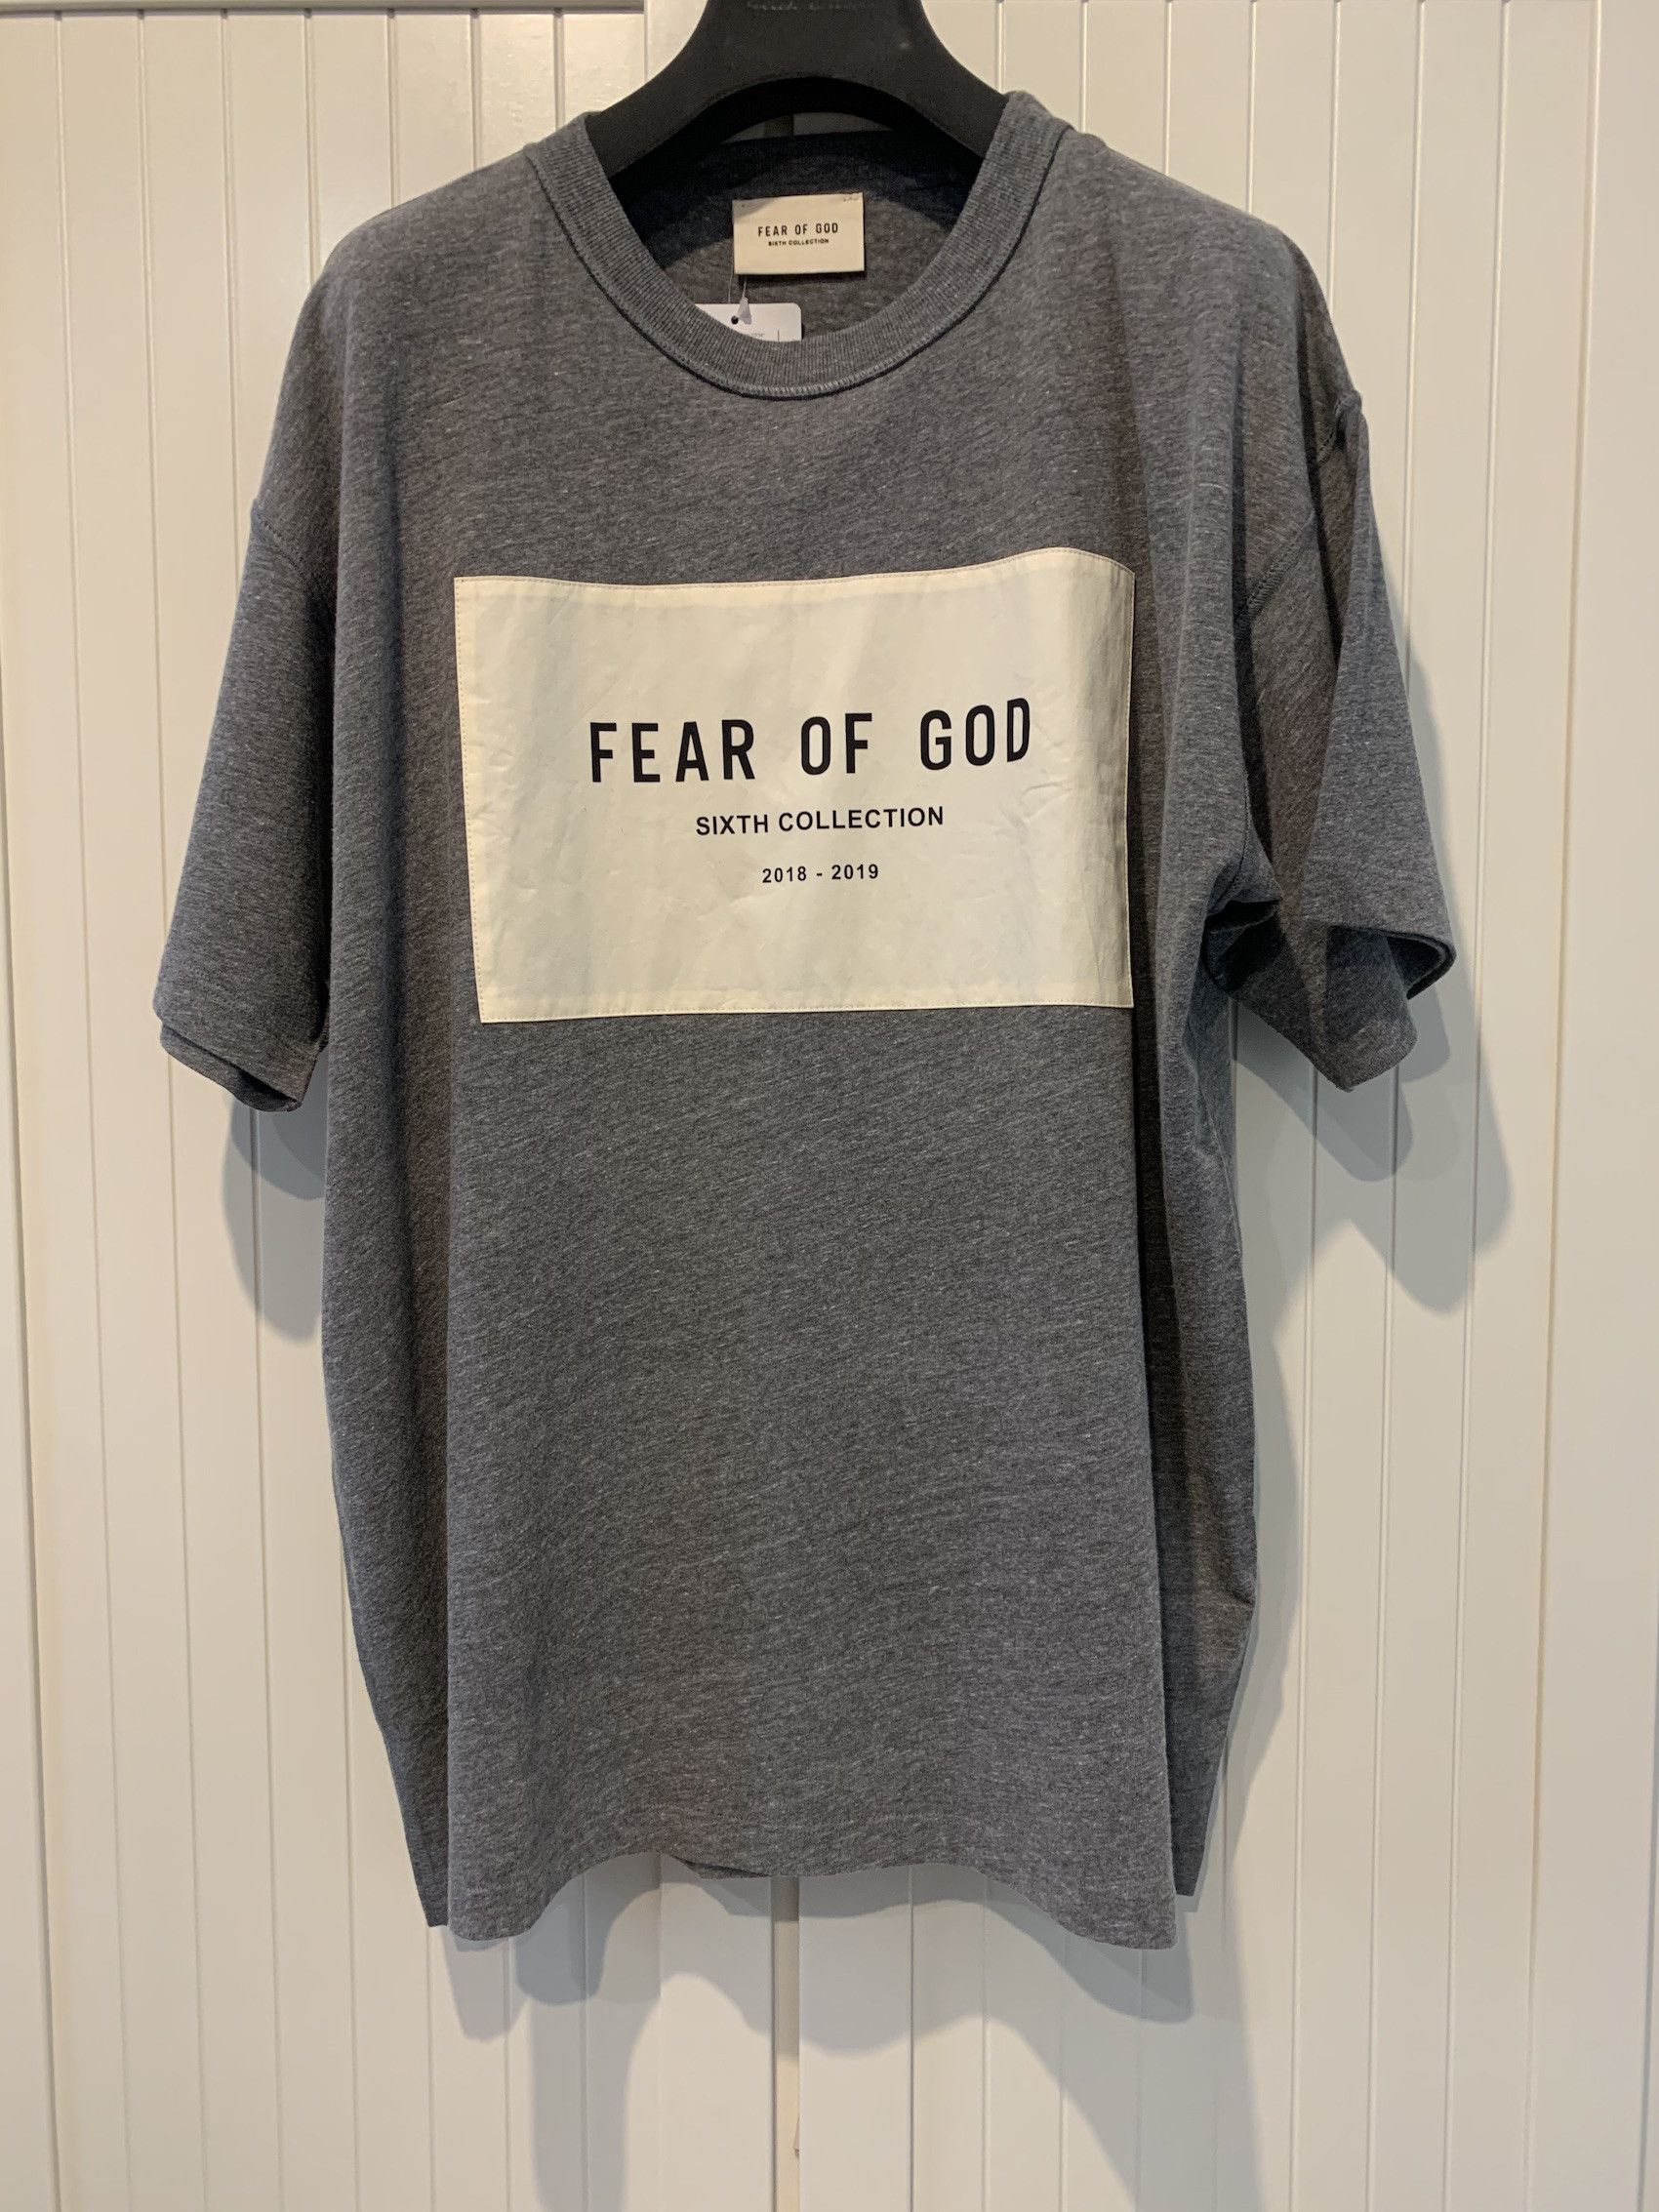 Fear of God FW'19 6th Collection T-shirt | Grailed